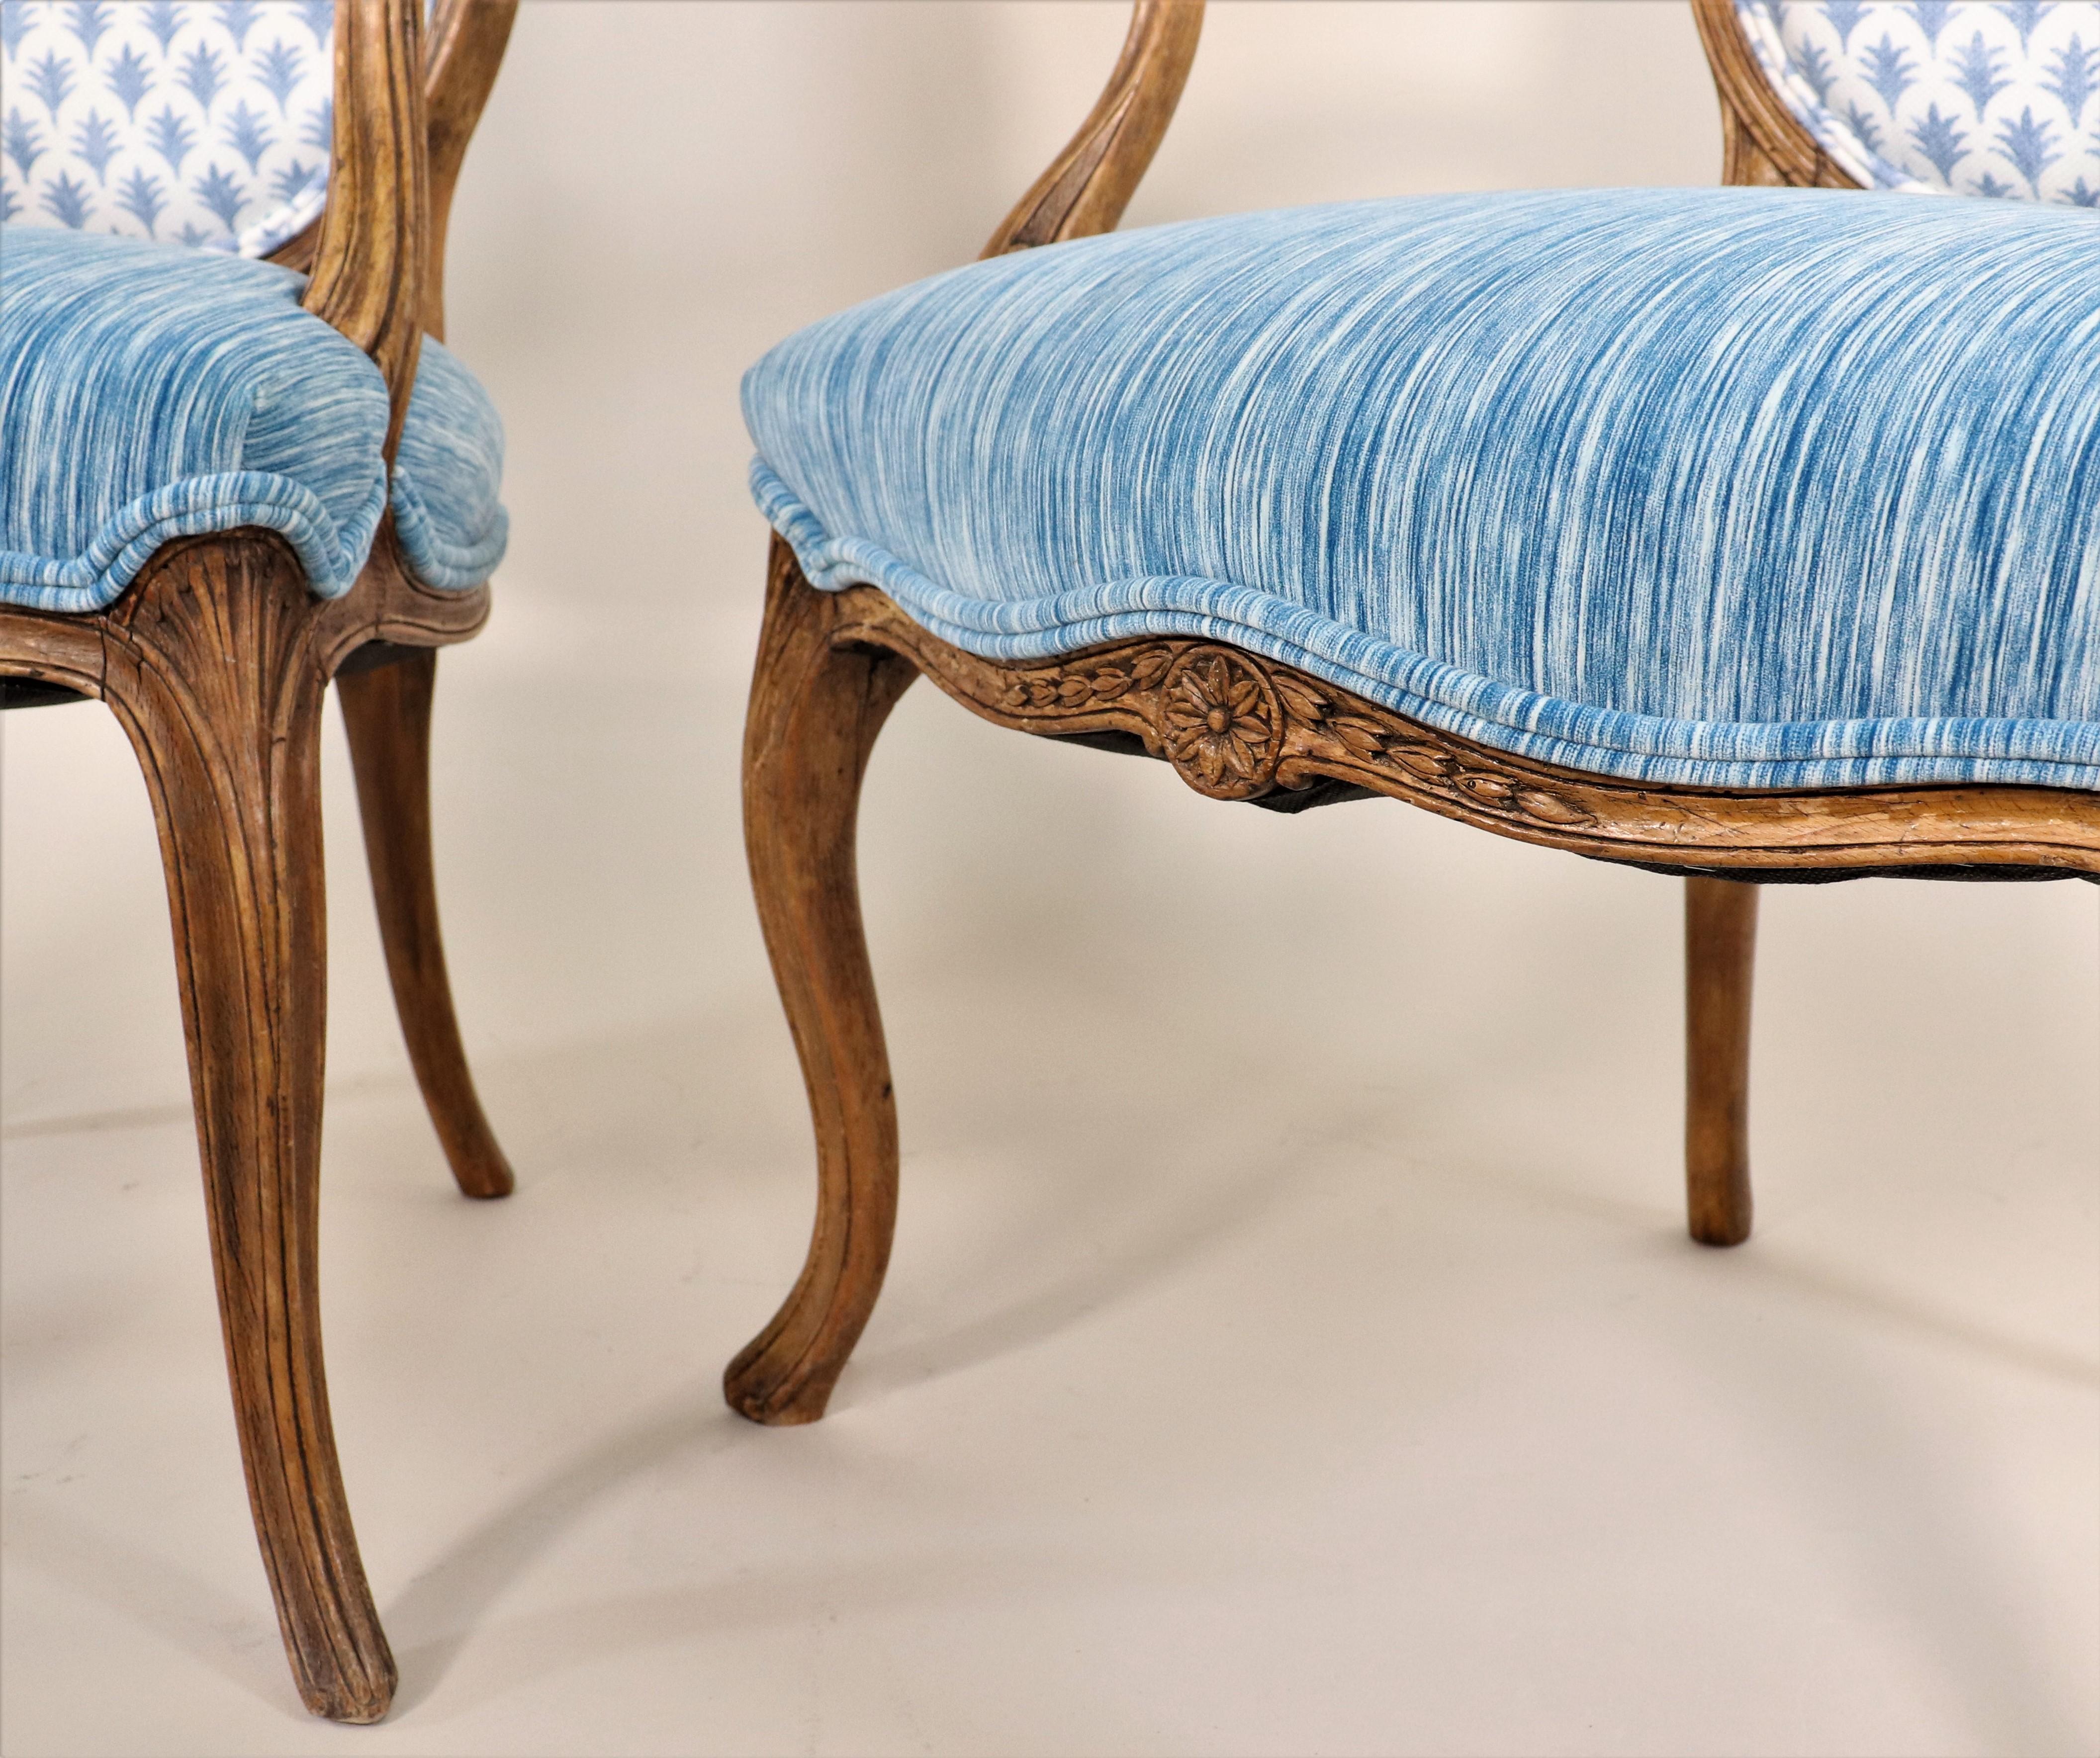 Pair of Mid-19th Century French Régence Style Fauteuils with Modern Fabrics For Sale 1